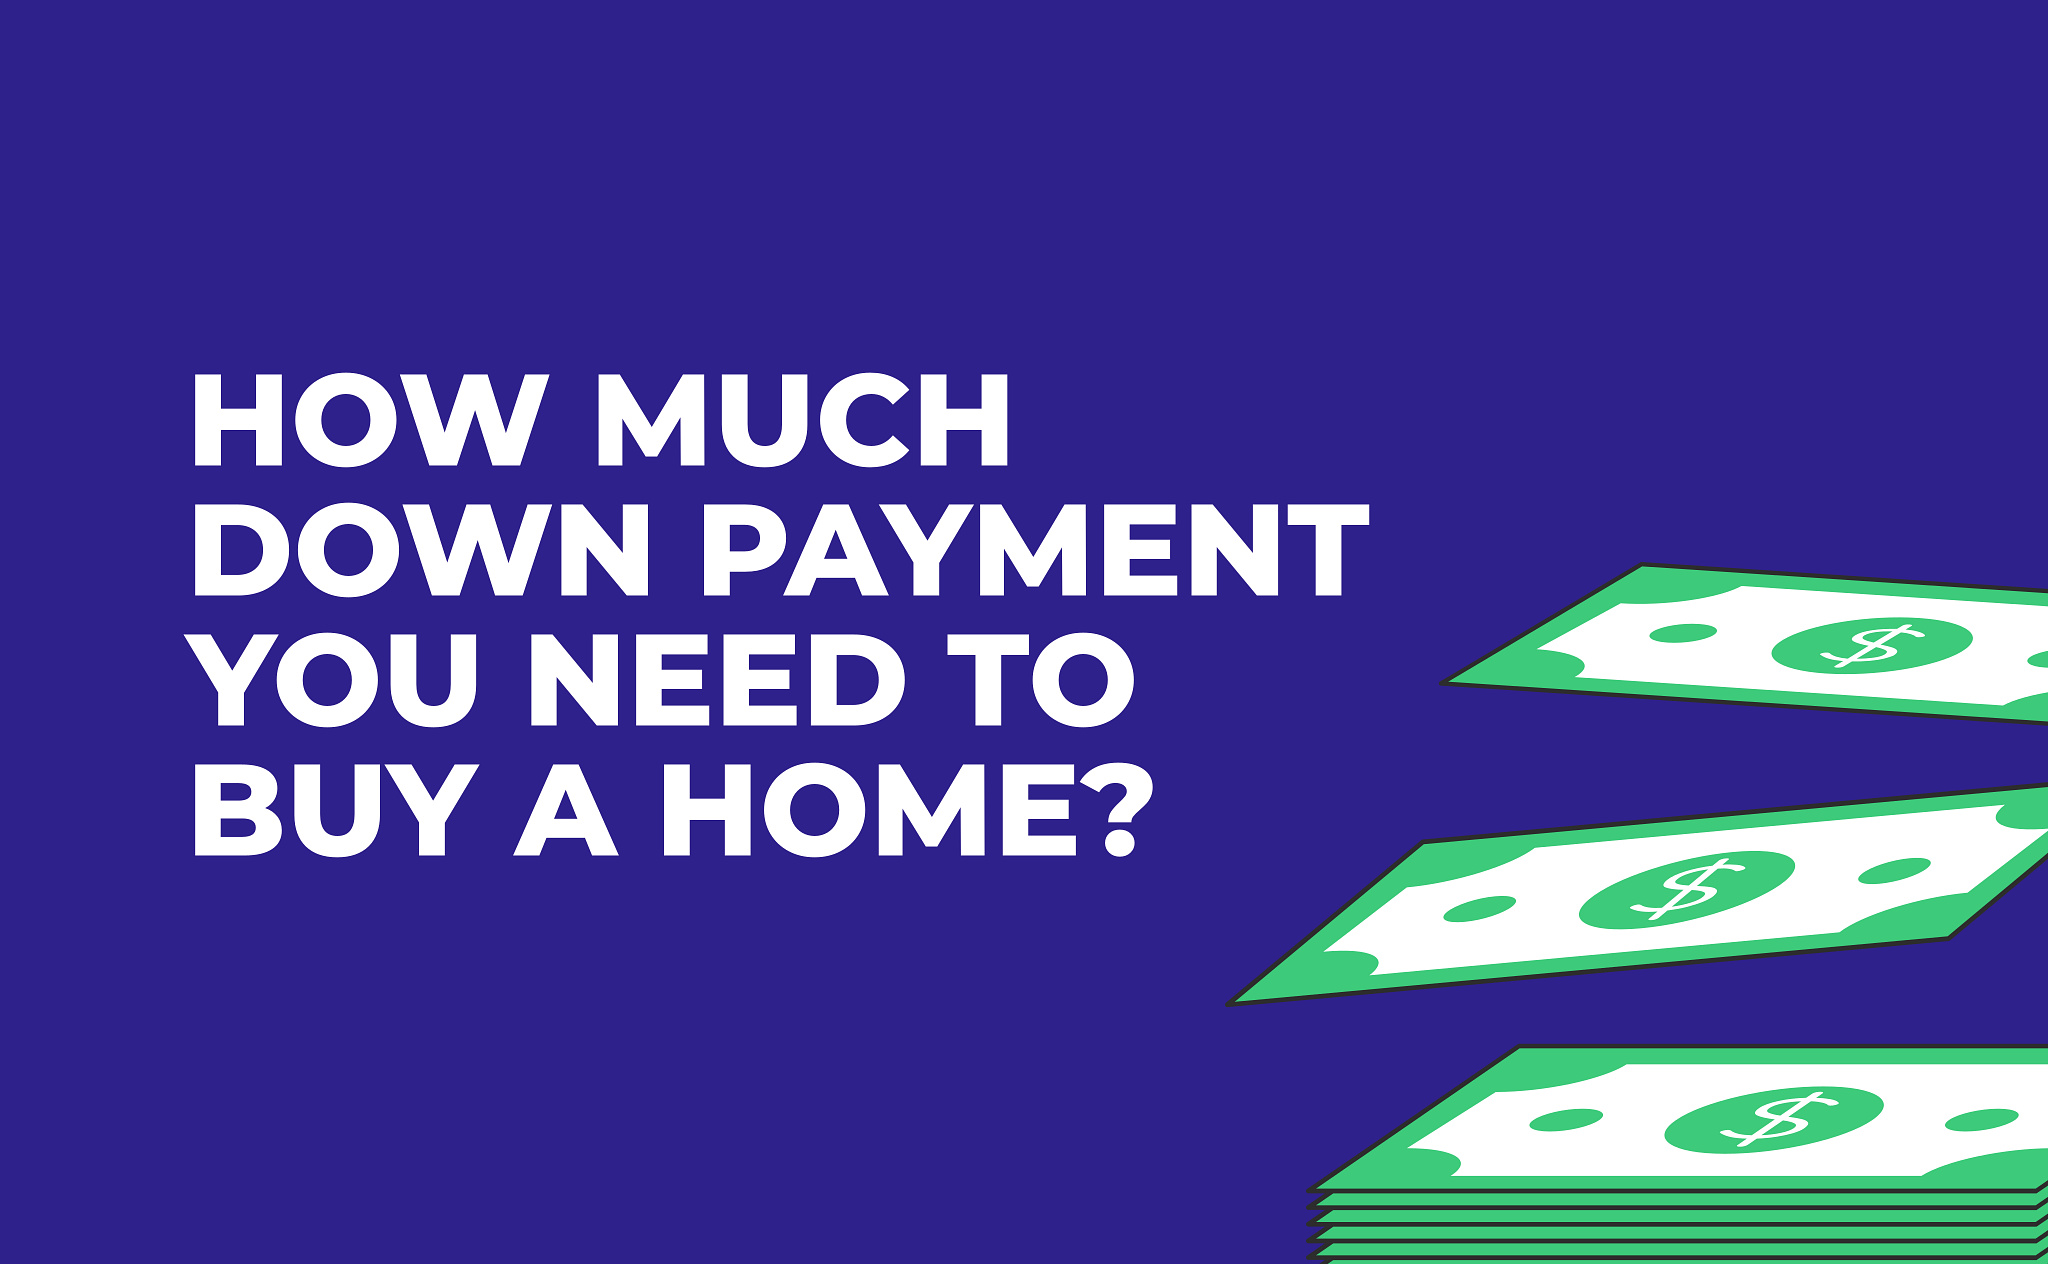 How Much Down Payment Do You Need To Buy A Home?